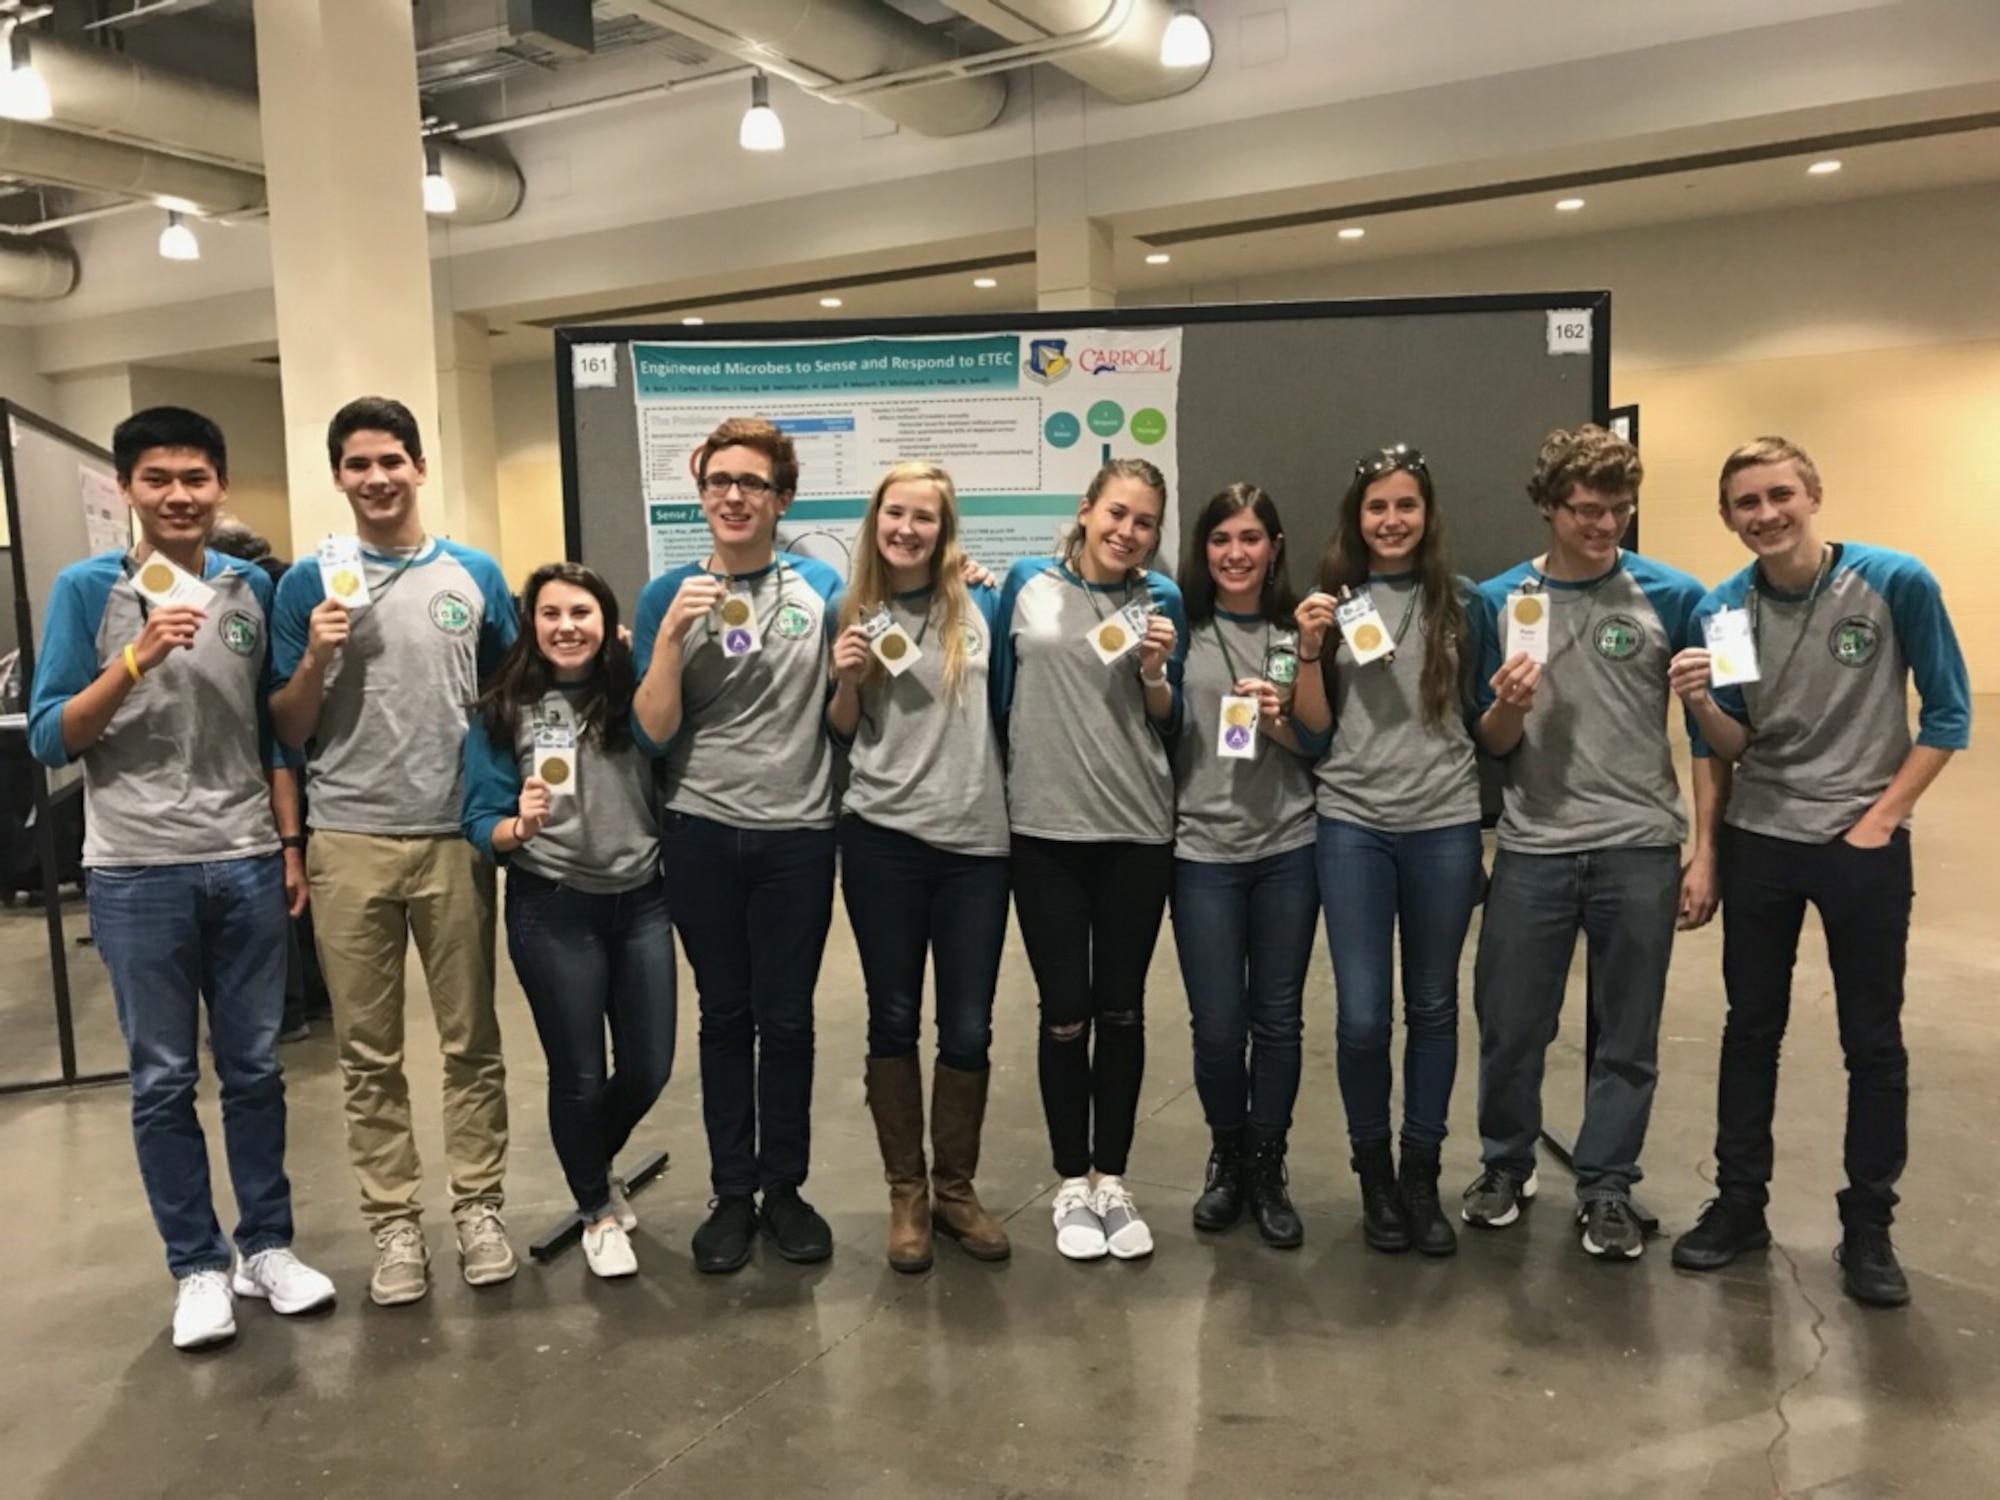 The Air Force Research Laboratory-Carroll High School iGEM team proudly displays their gold medals after the international iGEM competition in Boston Nov. 13.